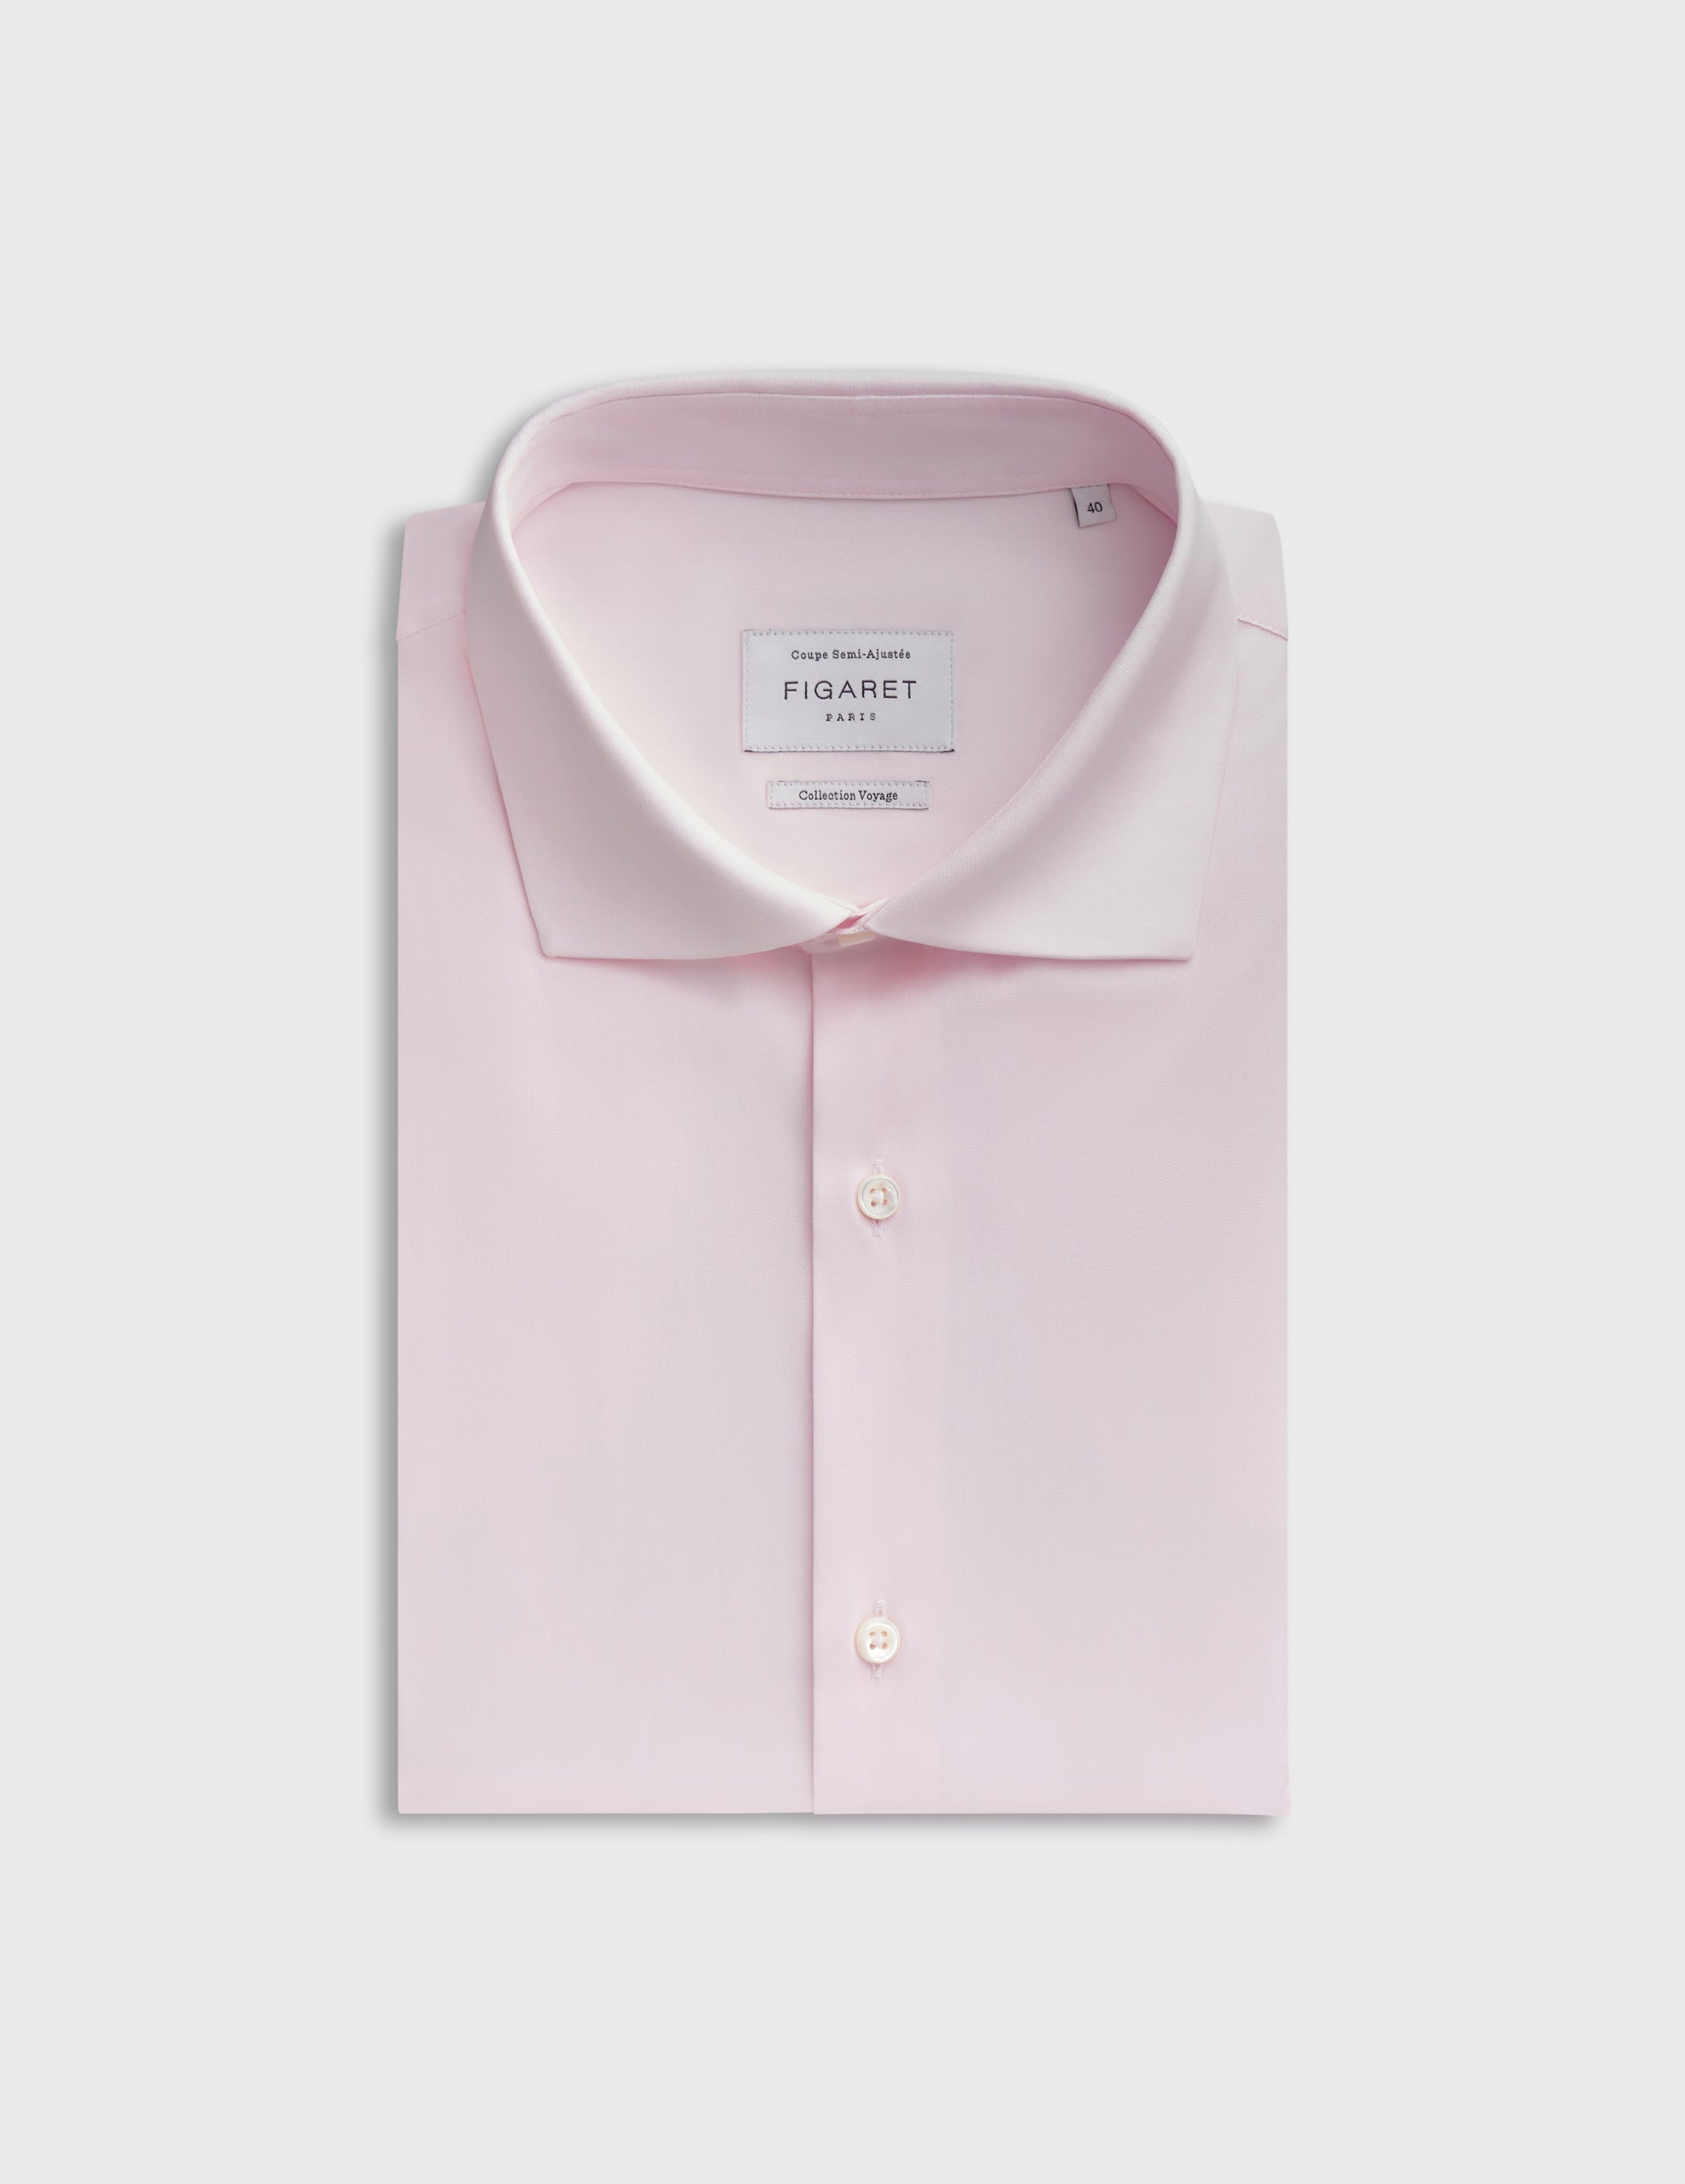 Semi-fitted light pink wrinkle-free shirt - pin point - Italian Collar